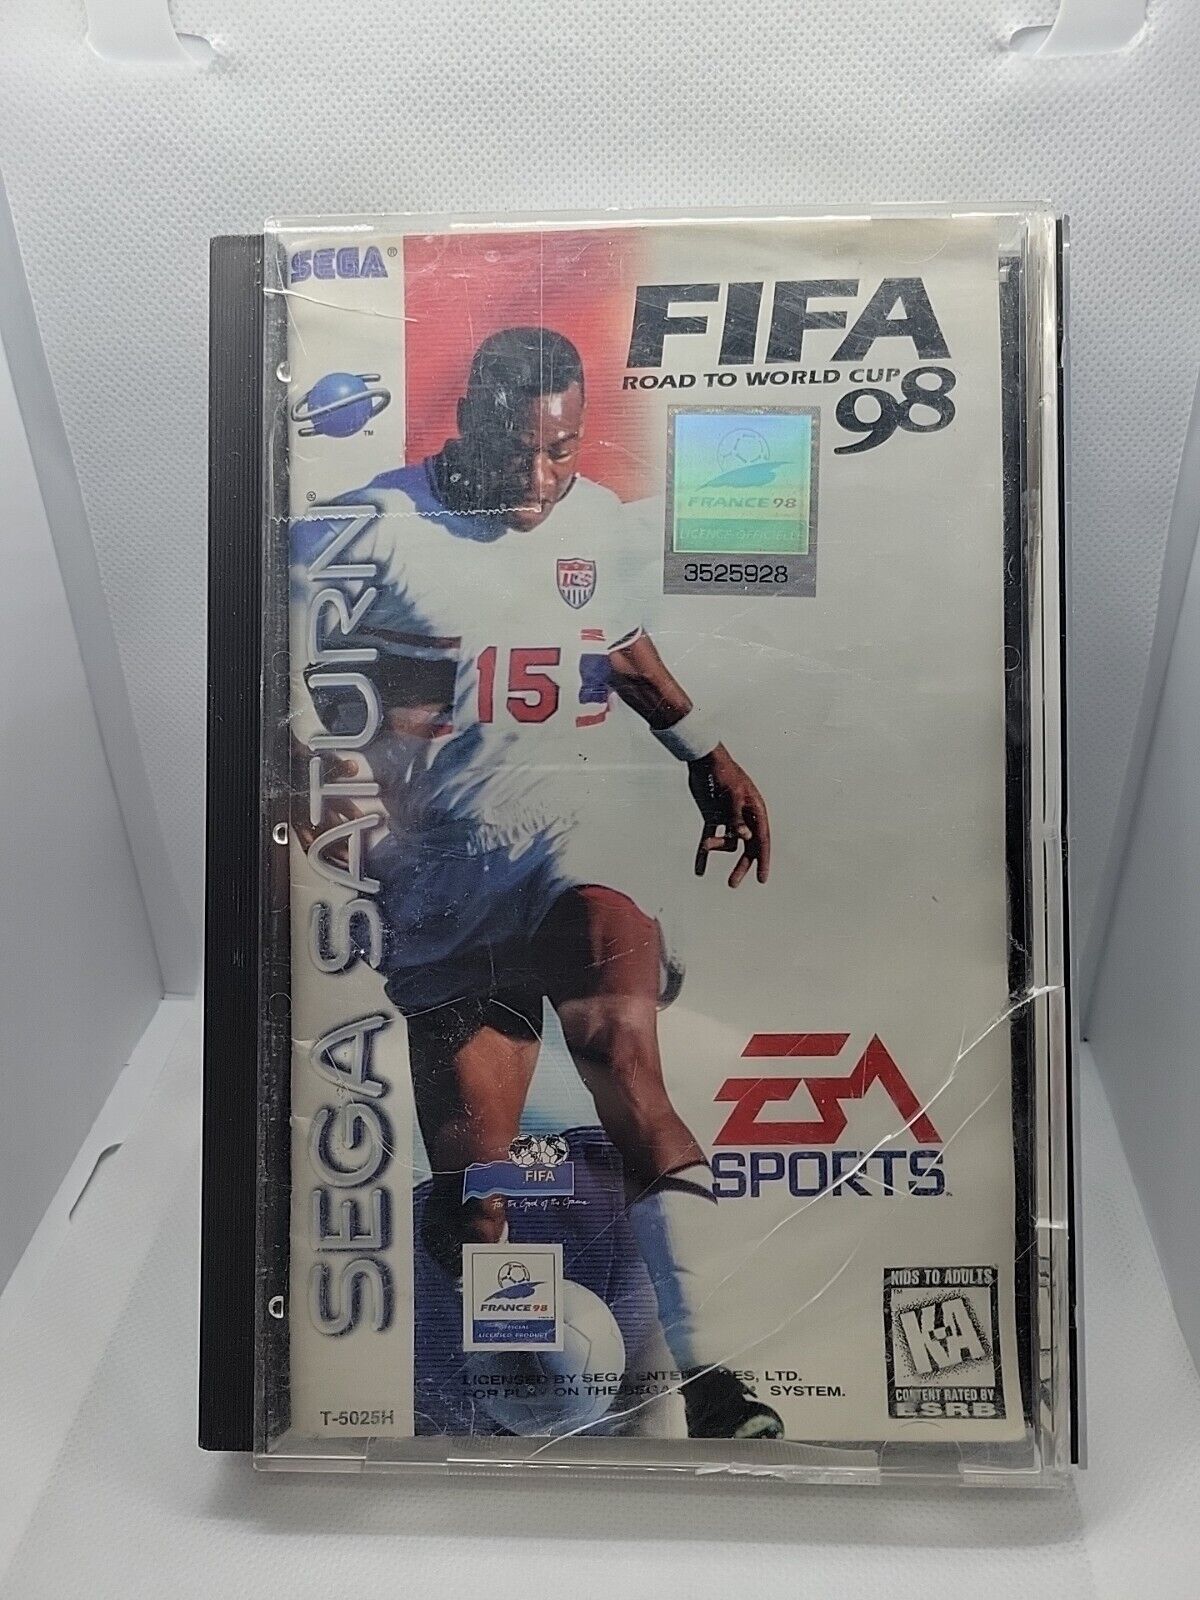 FIFA: Road to World Cup 98 (Sega Saturn, 1997) Cracked Case, As seen in Photo